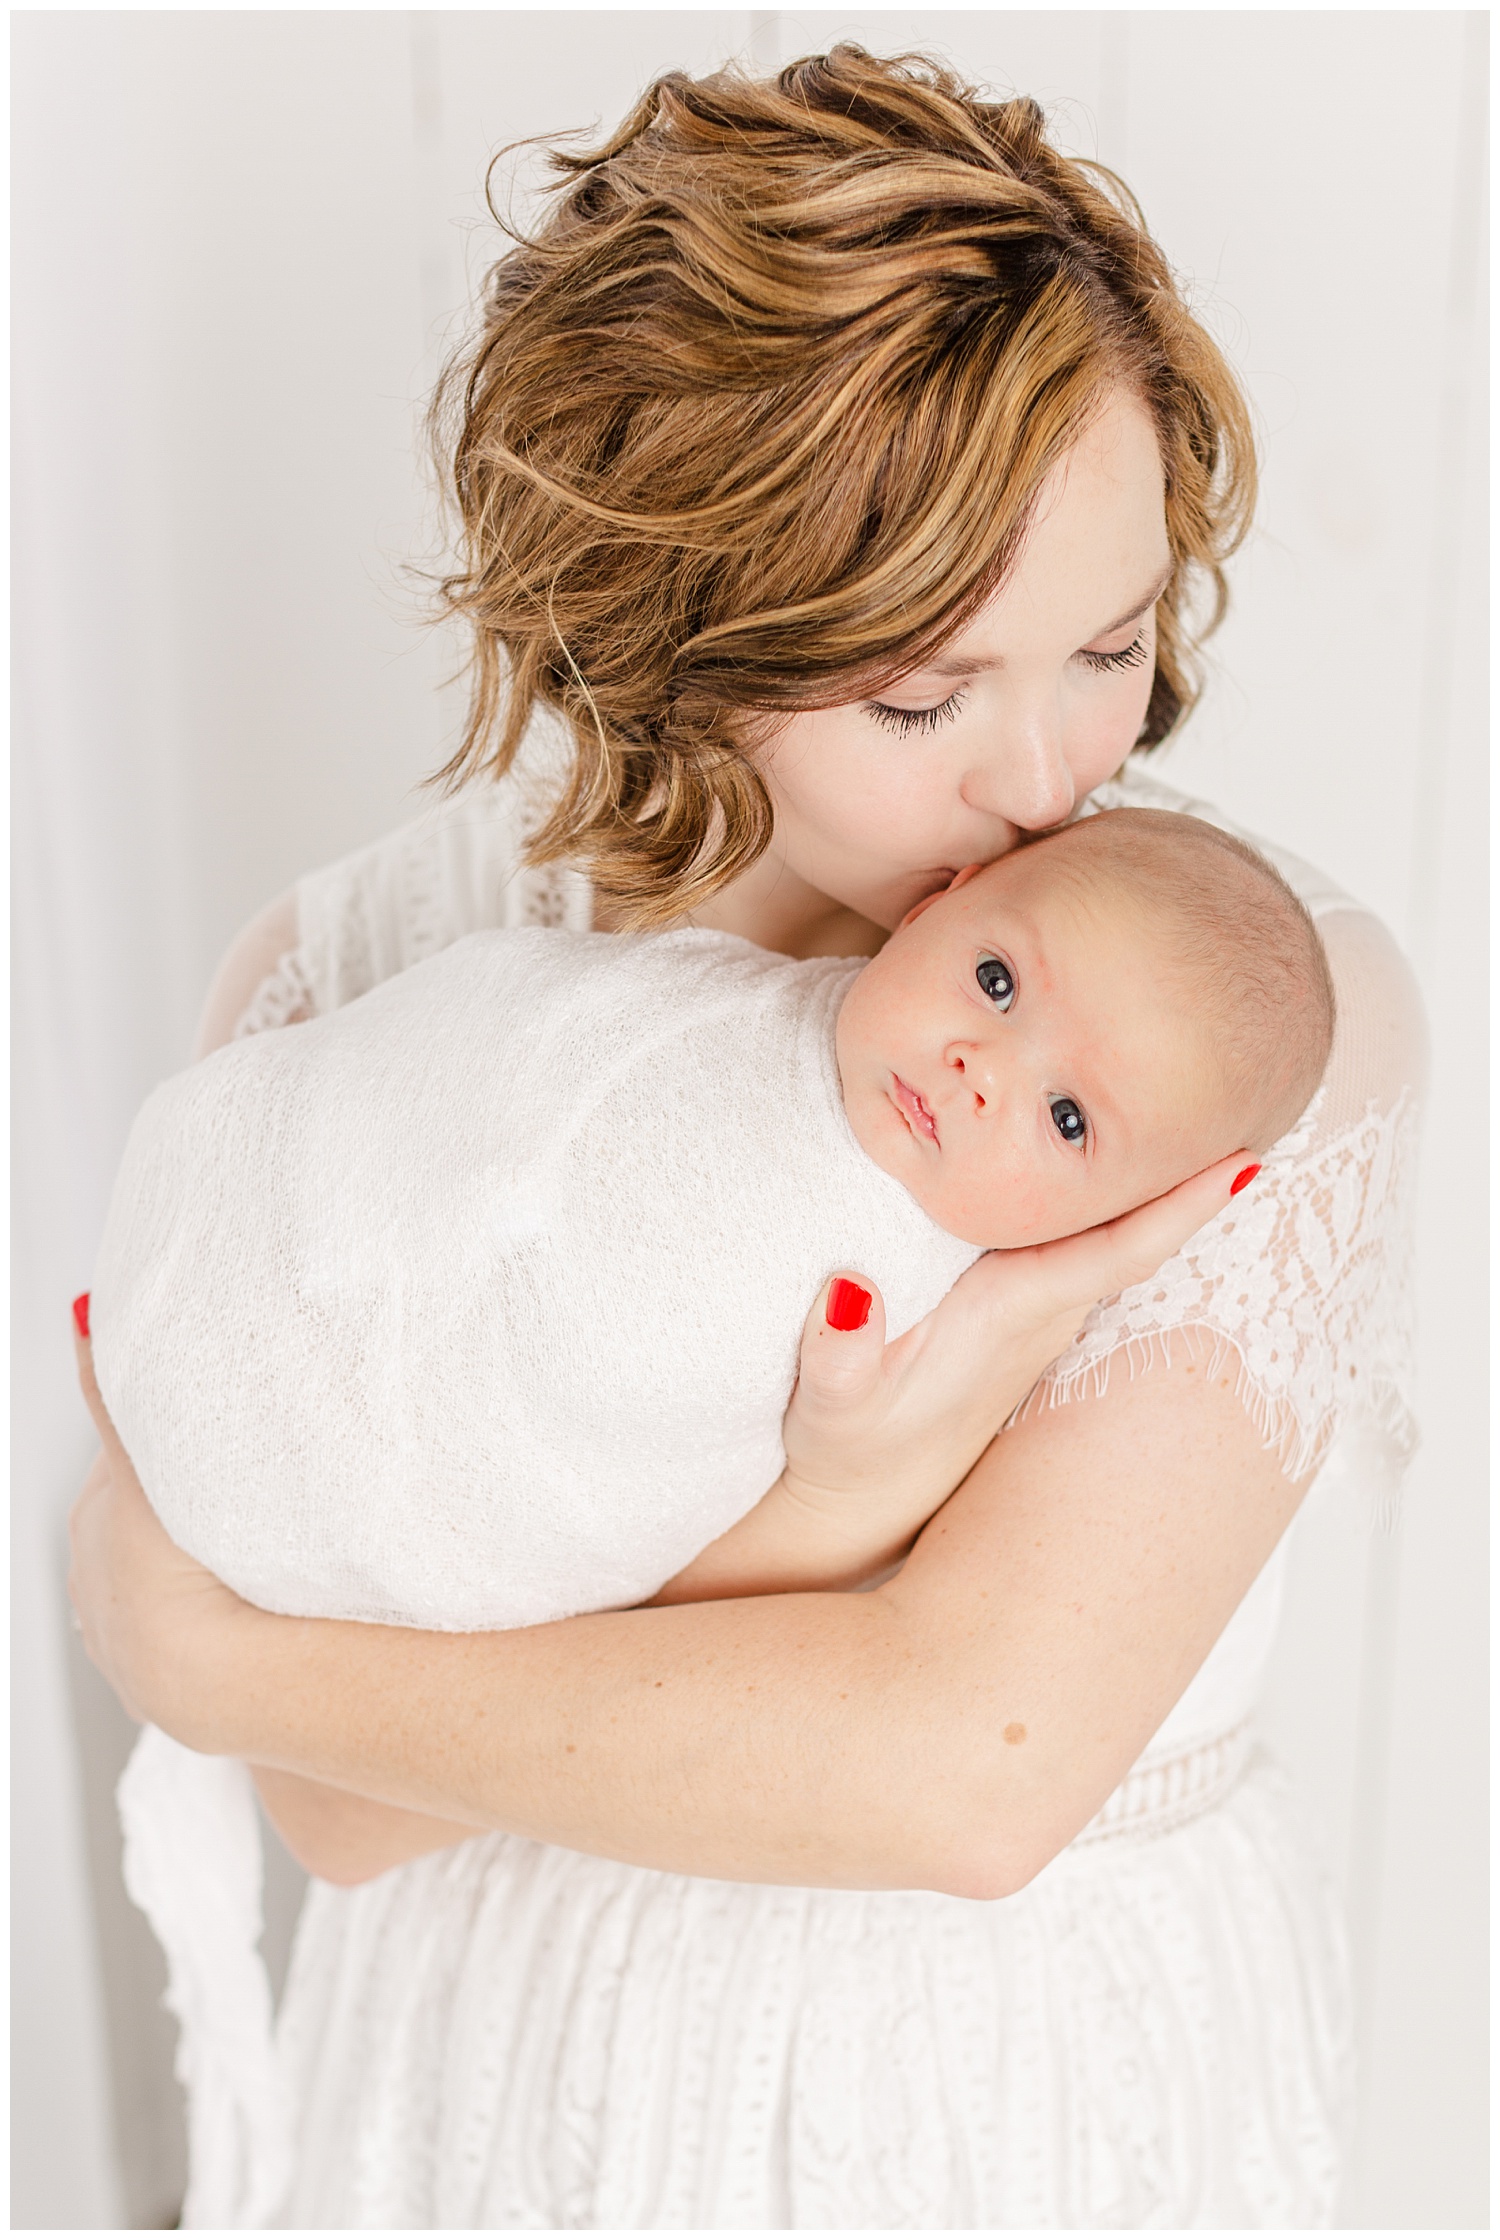 Bree dressed in white lace snuggles and gently kisses her new baby boy | CB Studio